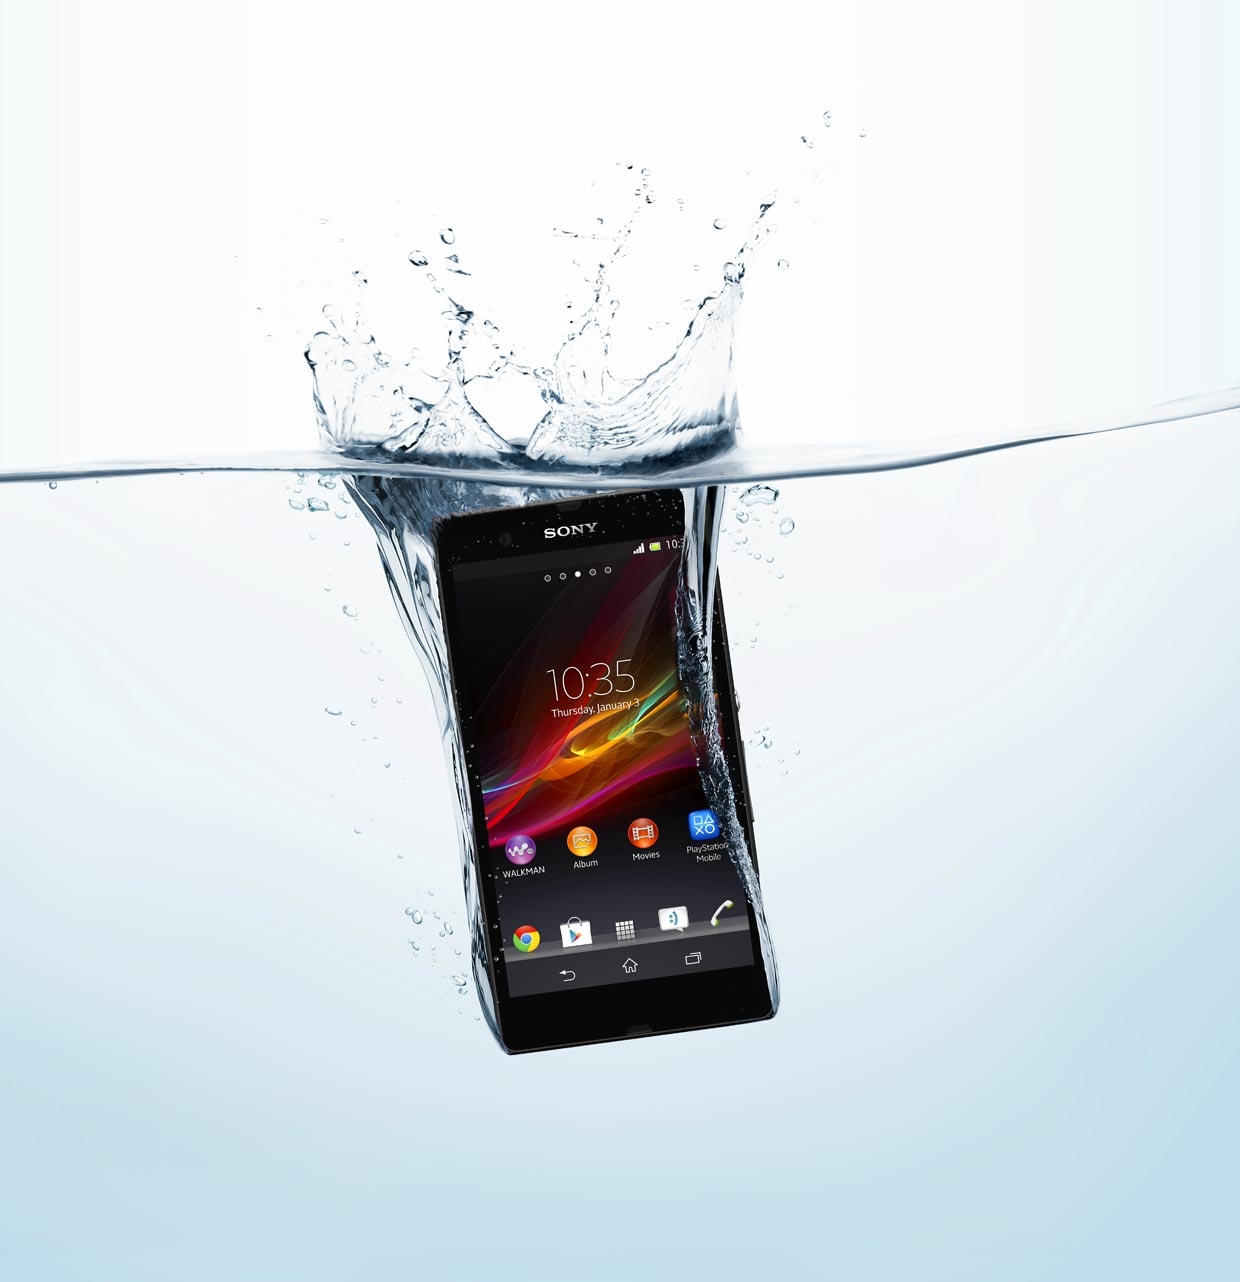 The Xperia Z Android mobile is built to handle life, with a water-resistant and dust-resistant design.